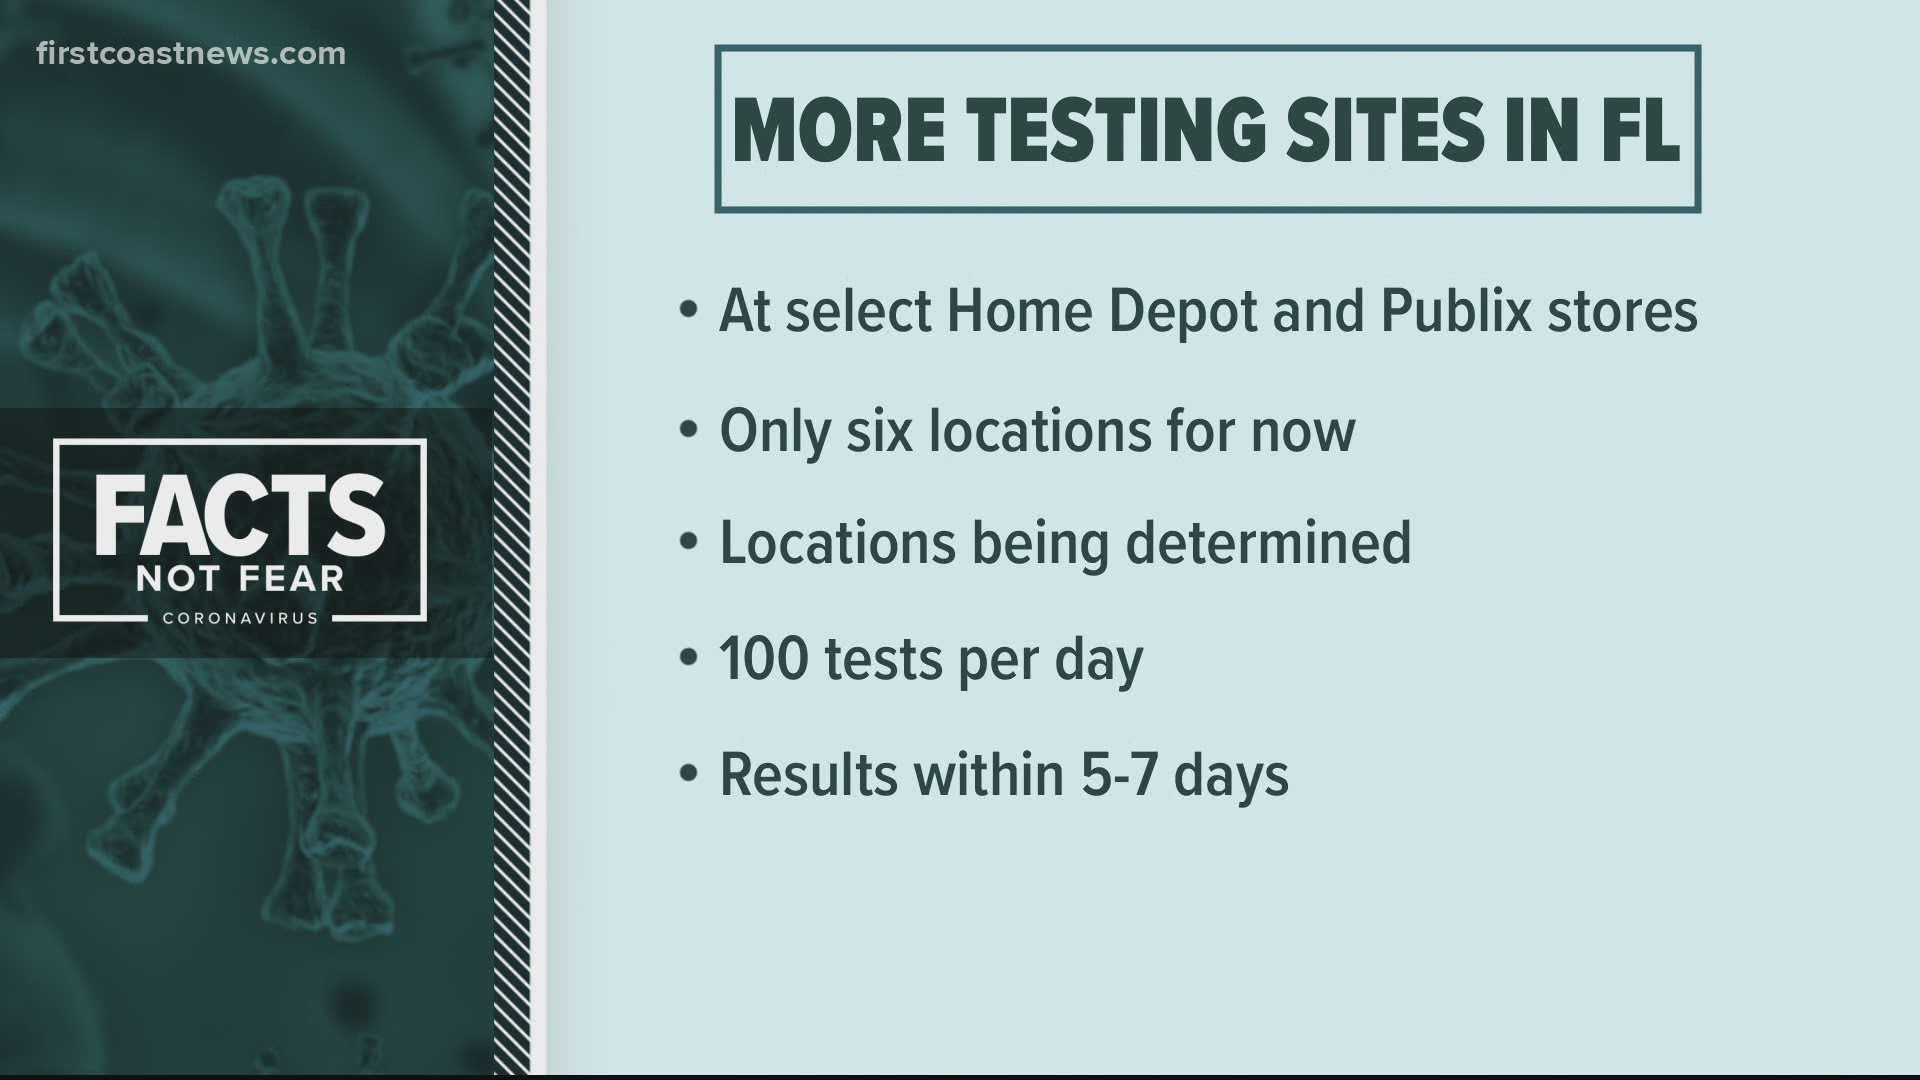 Each of the sites will be able to conduct up to 100 tests per day. Tests will be sent to Quest Diagnostics and results will be available within 5 to 7 days.